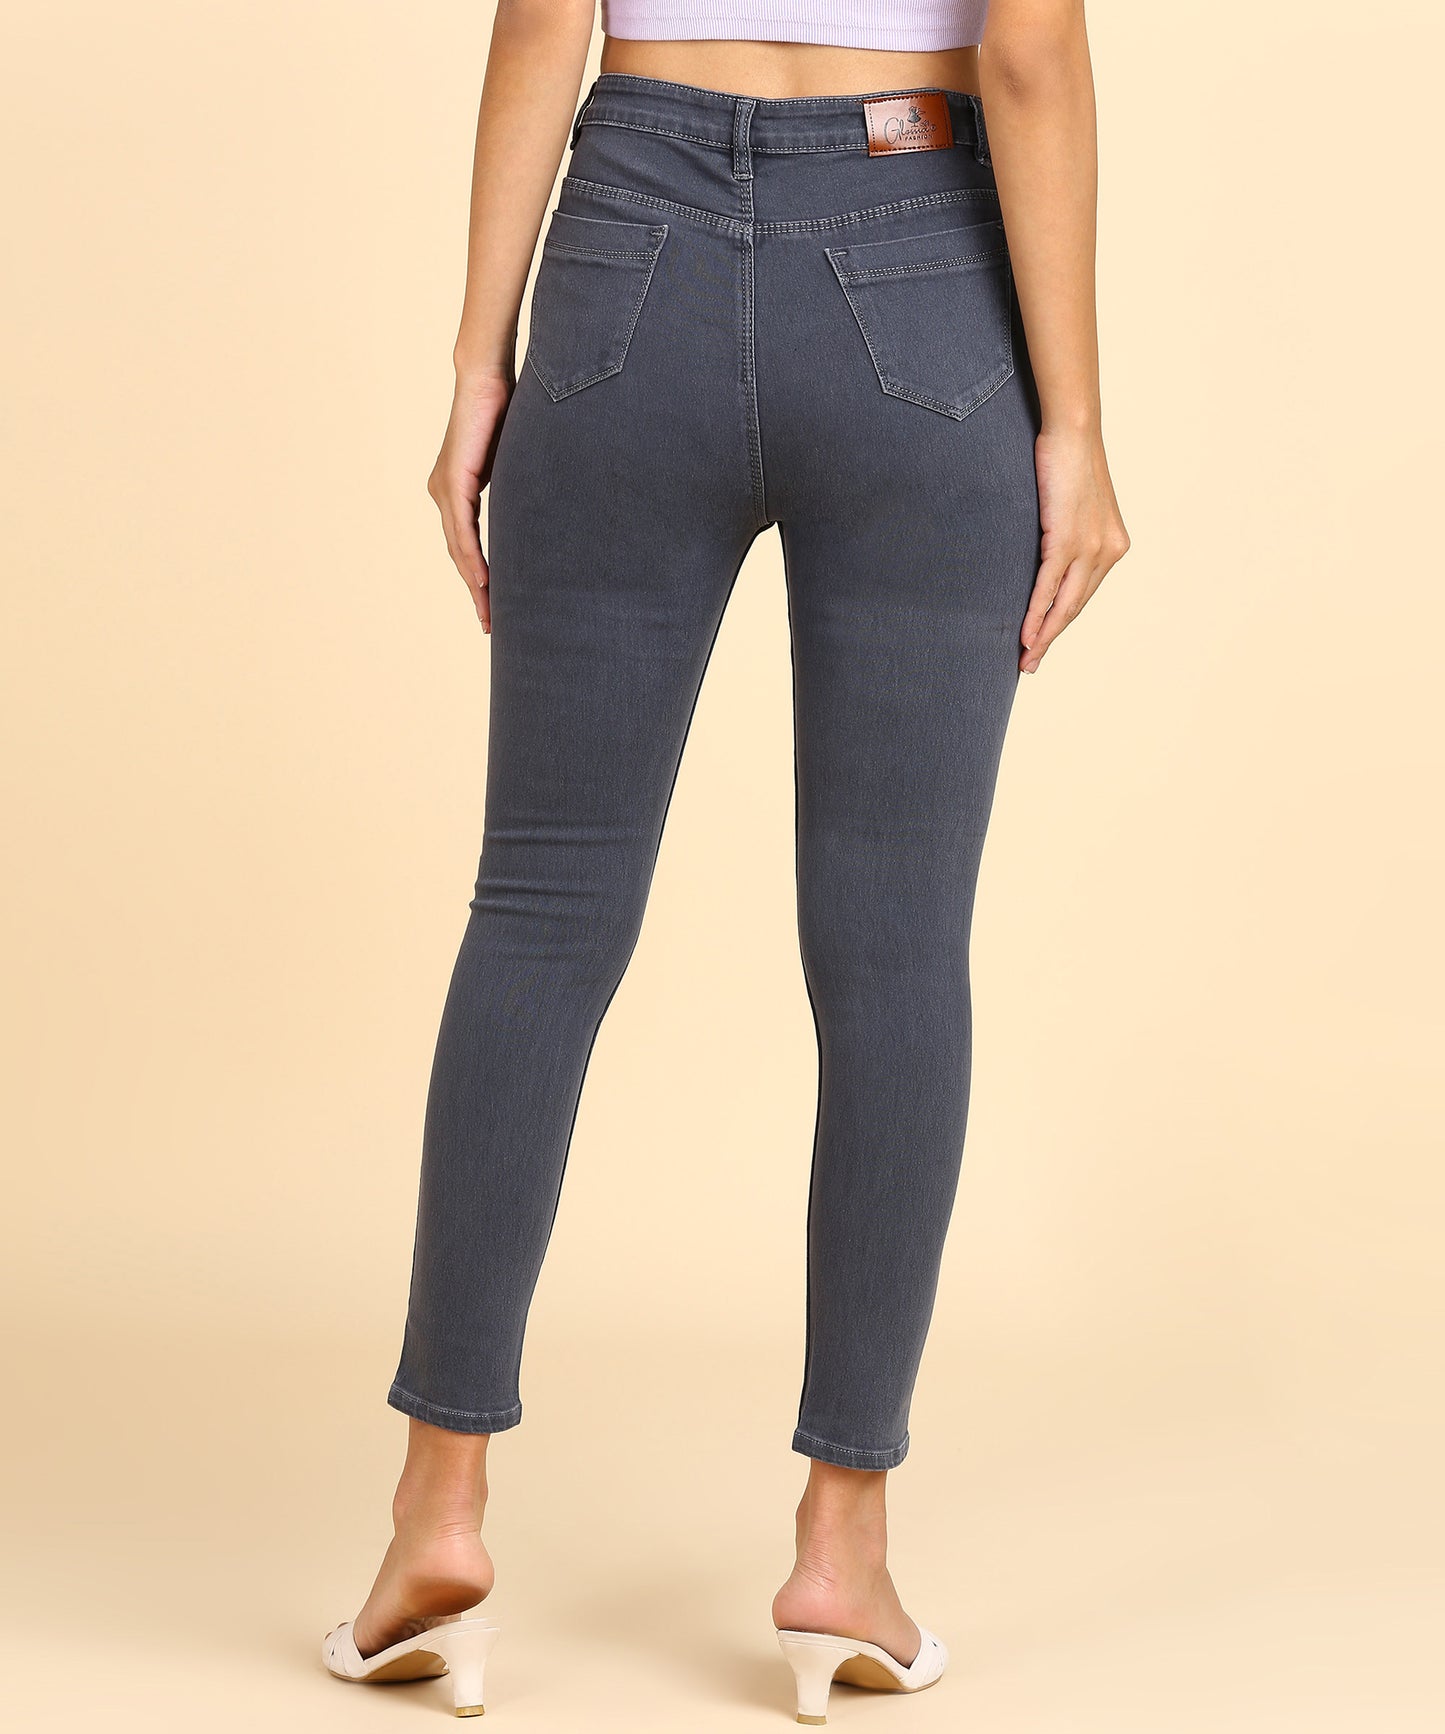 Grey High Rise Slim Fit Ankle Length Jeans- 5100N